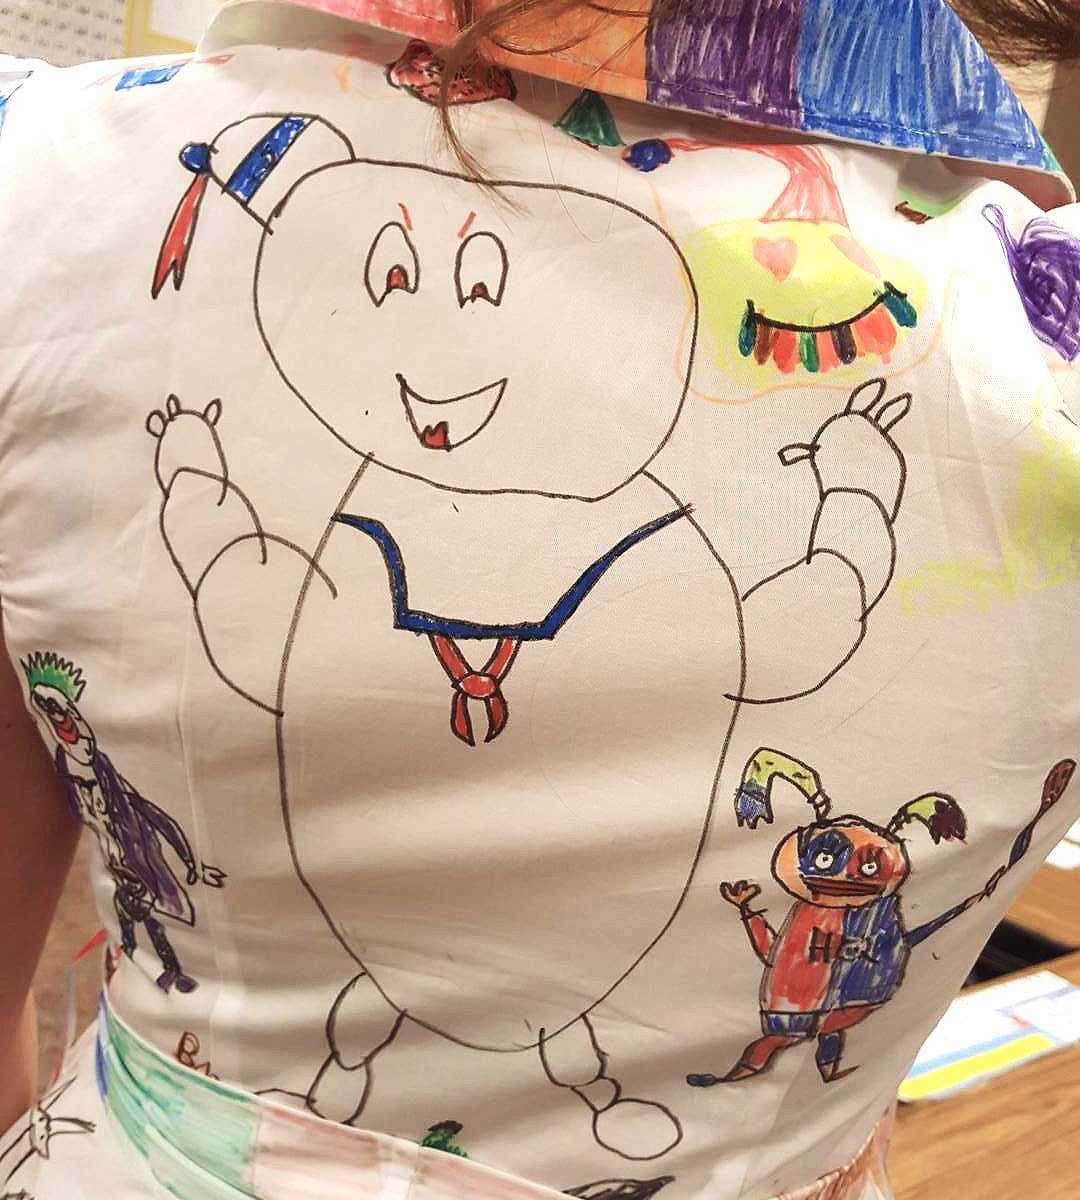 back of teachers dress that has doodle of Michelin man drawing on it